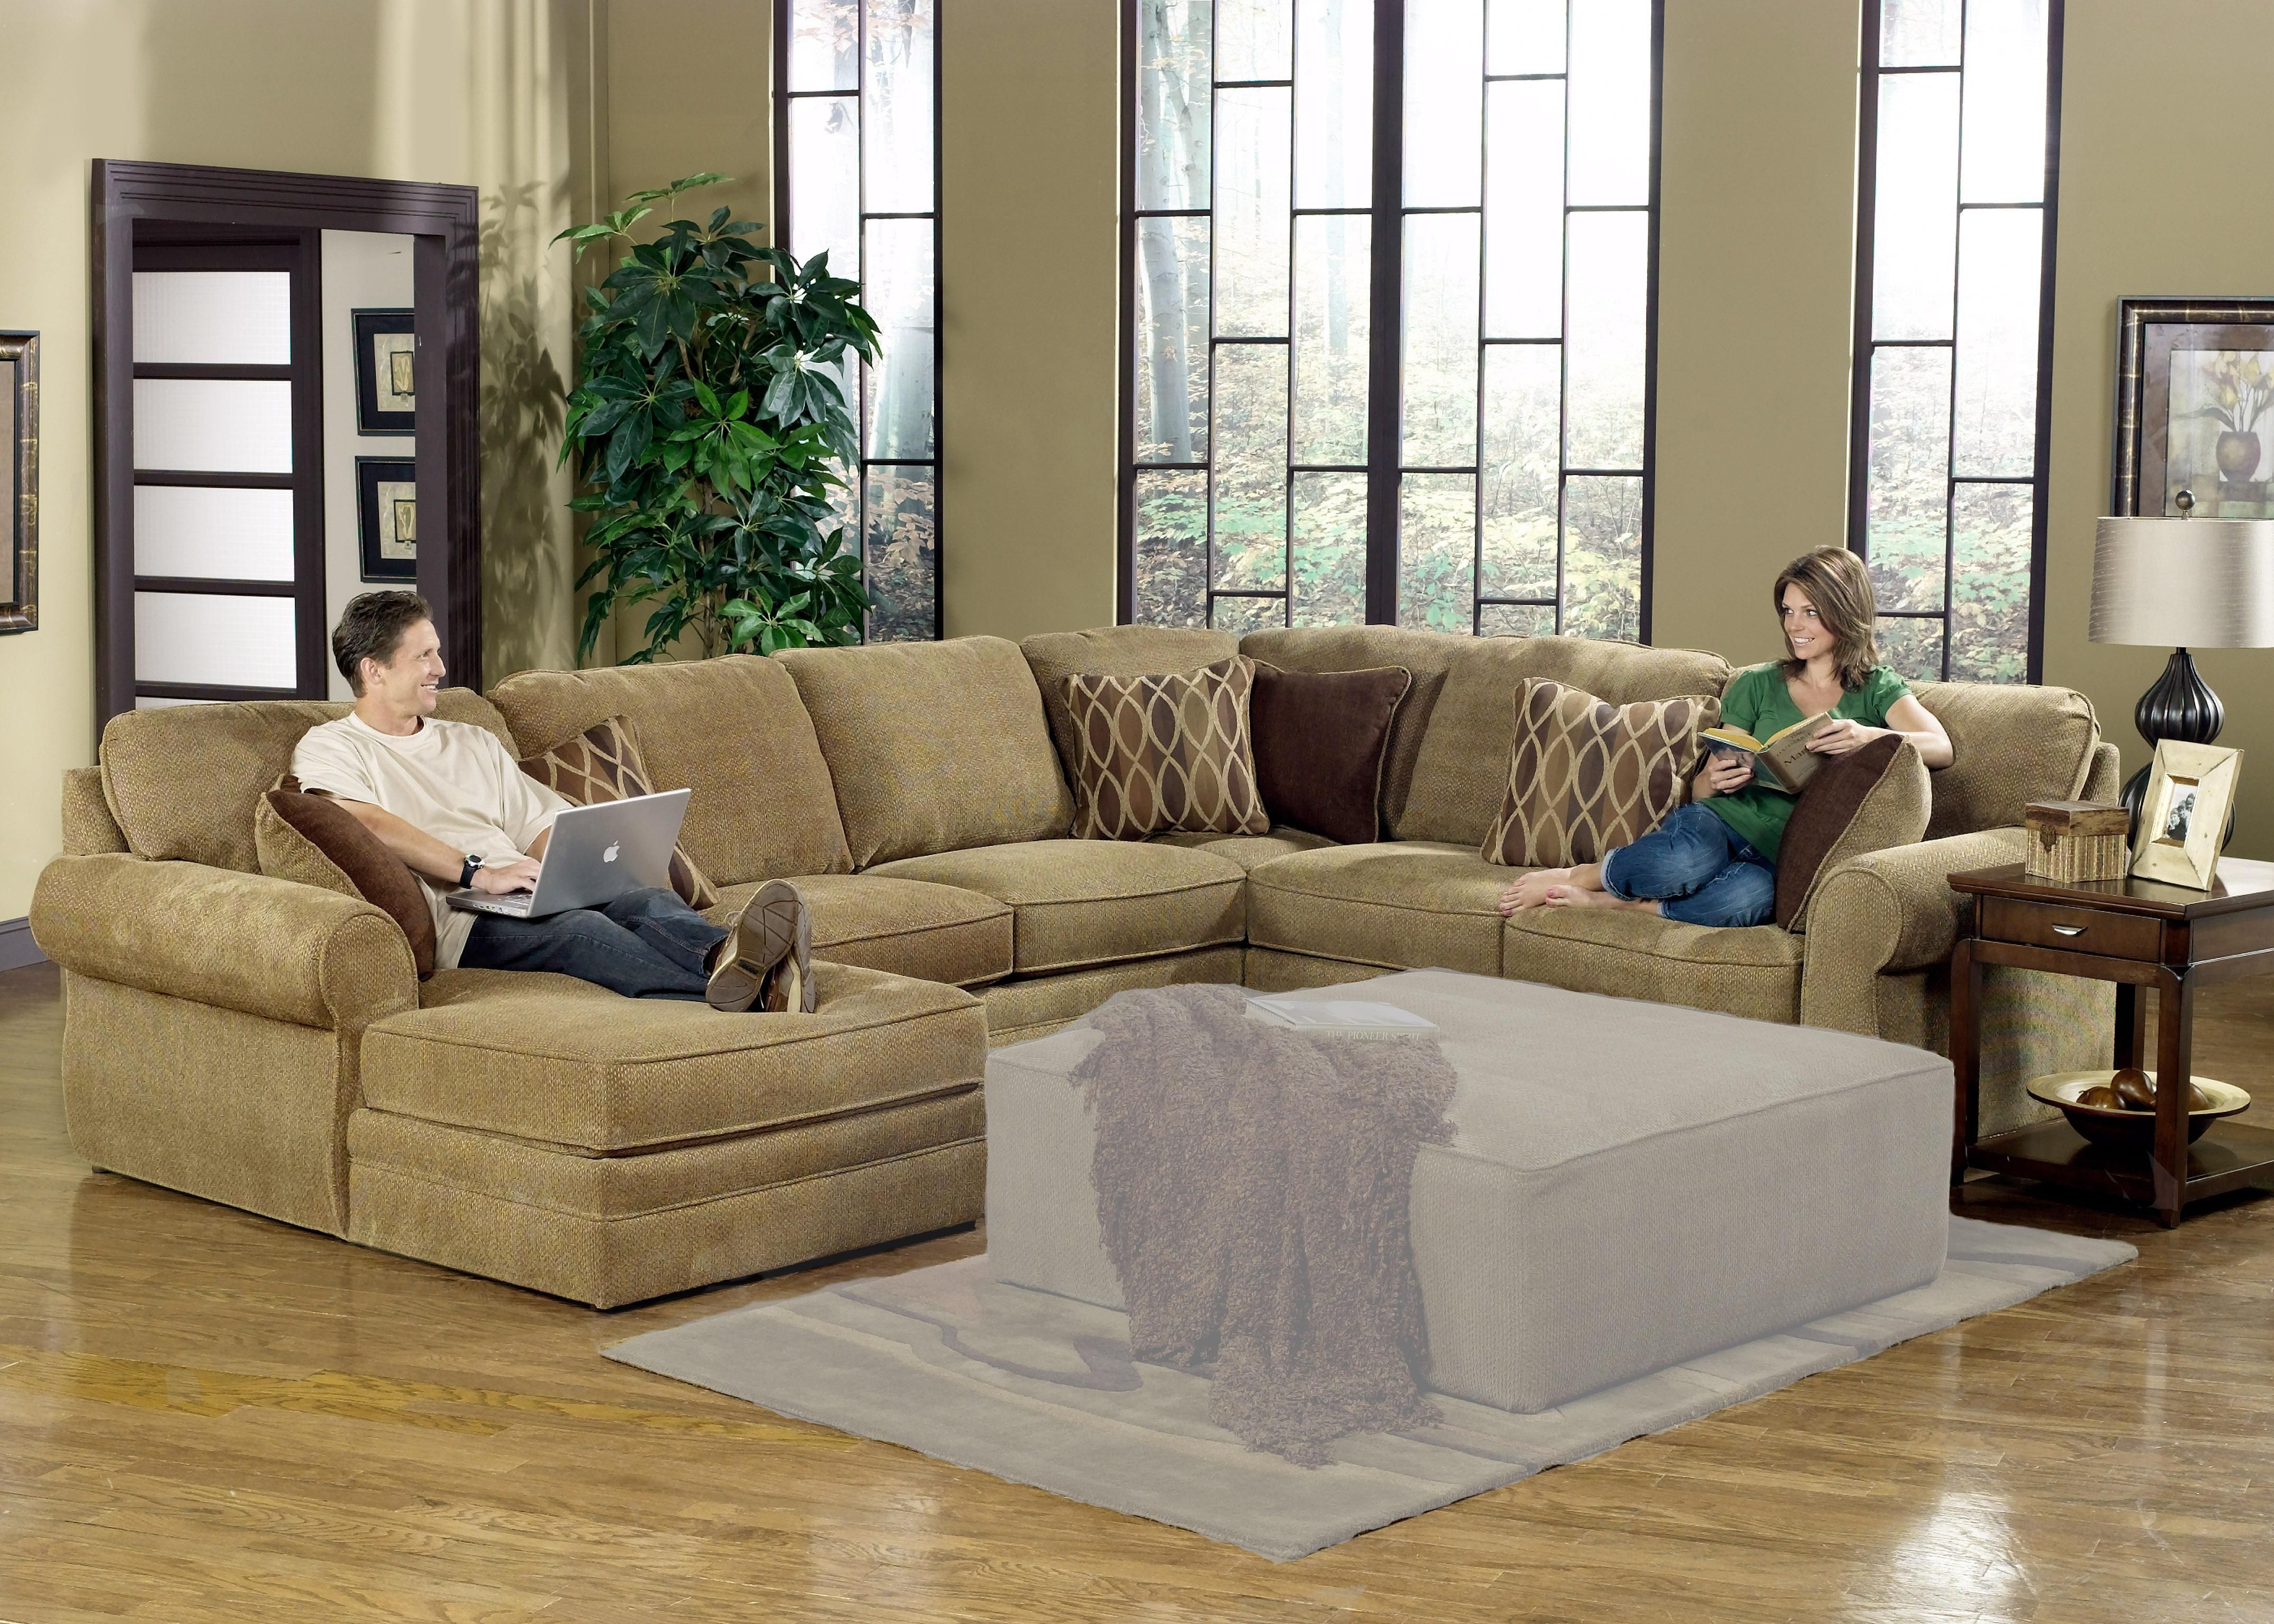 Fascinating U Shaped Sectional Sofas 123 Sofa Sectionals Canada Intended For Ontario Canada Sectional Sofas (View 5 of 10)